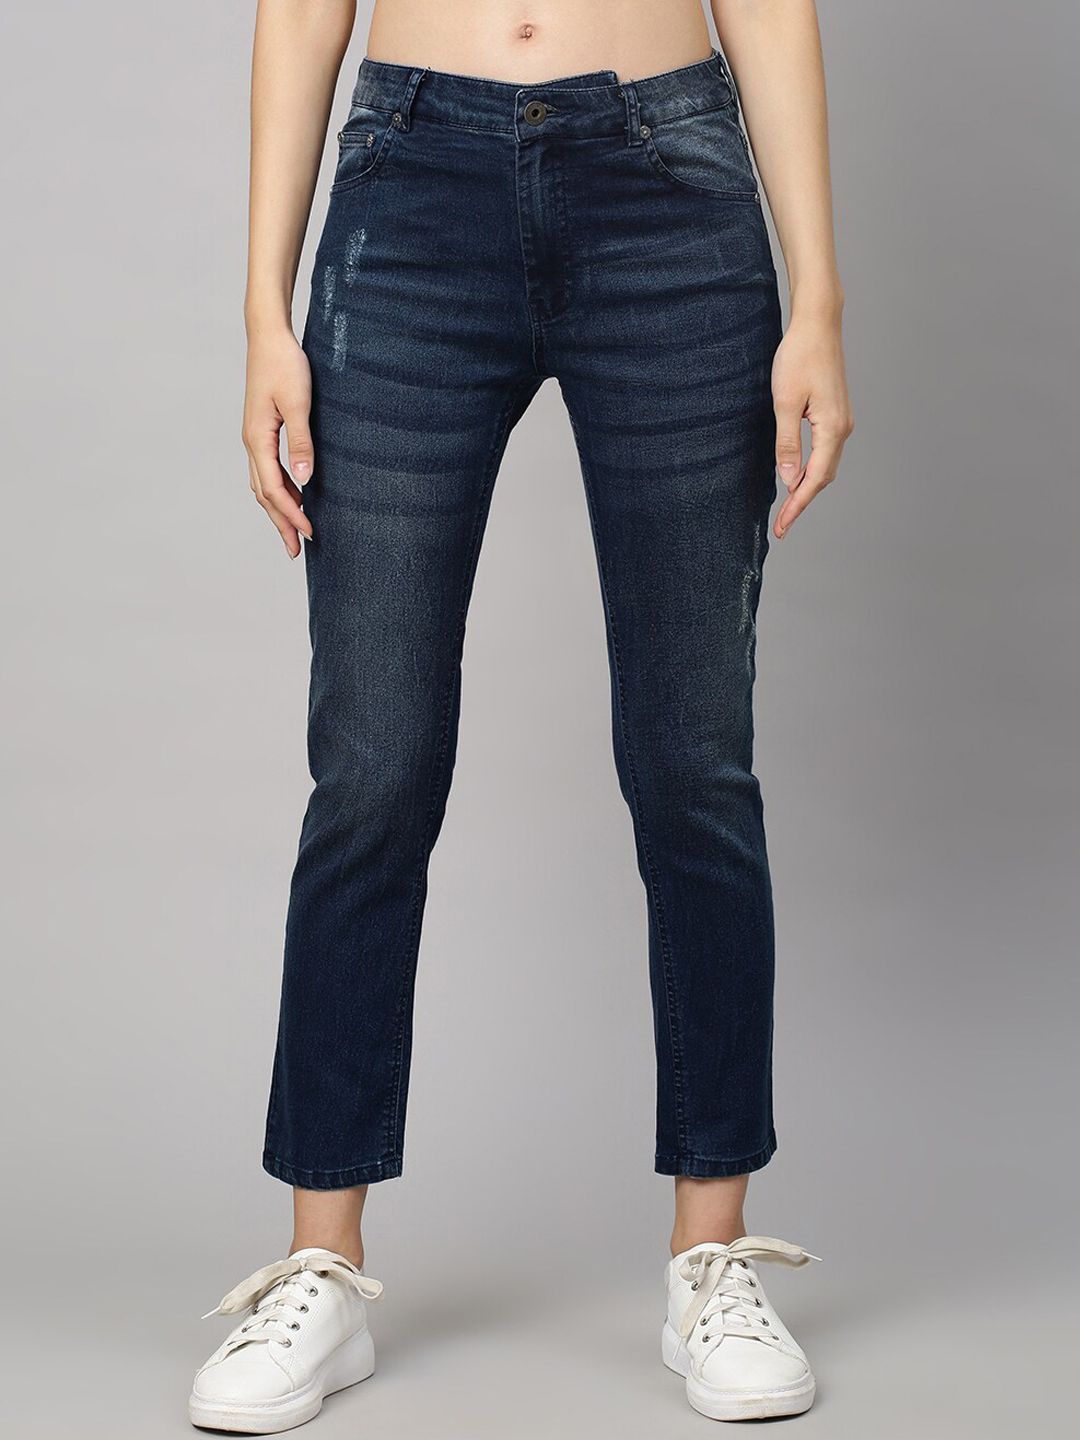 Chemistry Women Navy Blue Slim Fit Light Fade Jeans Price in India